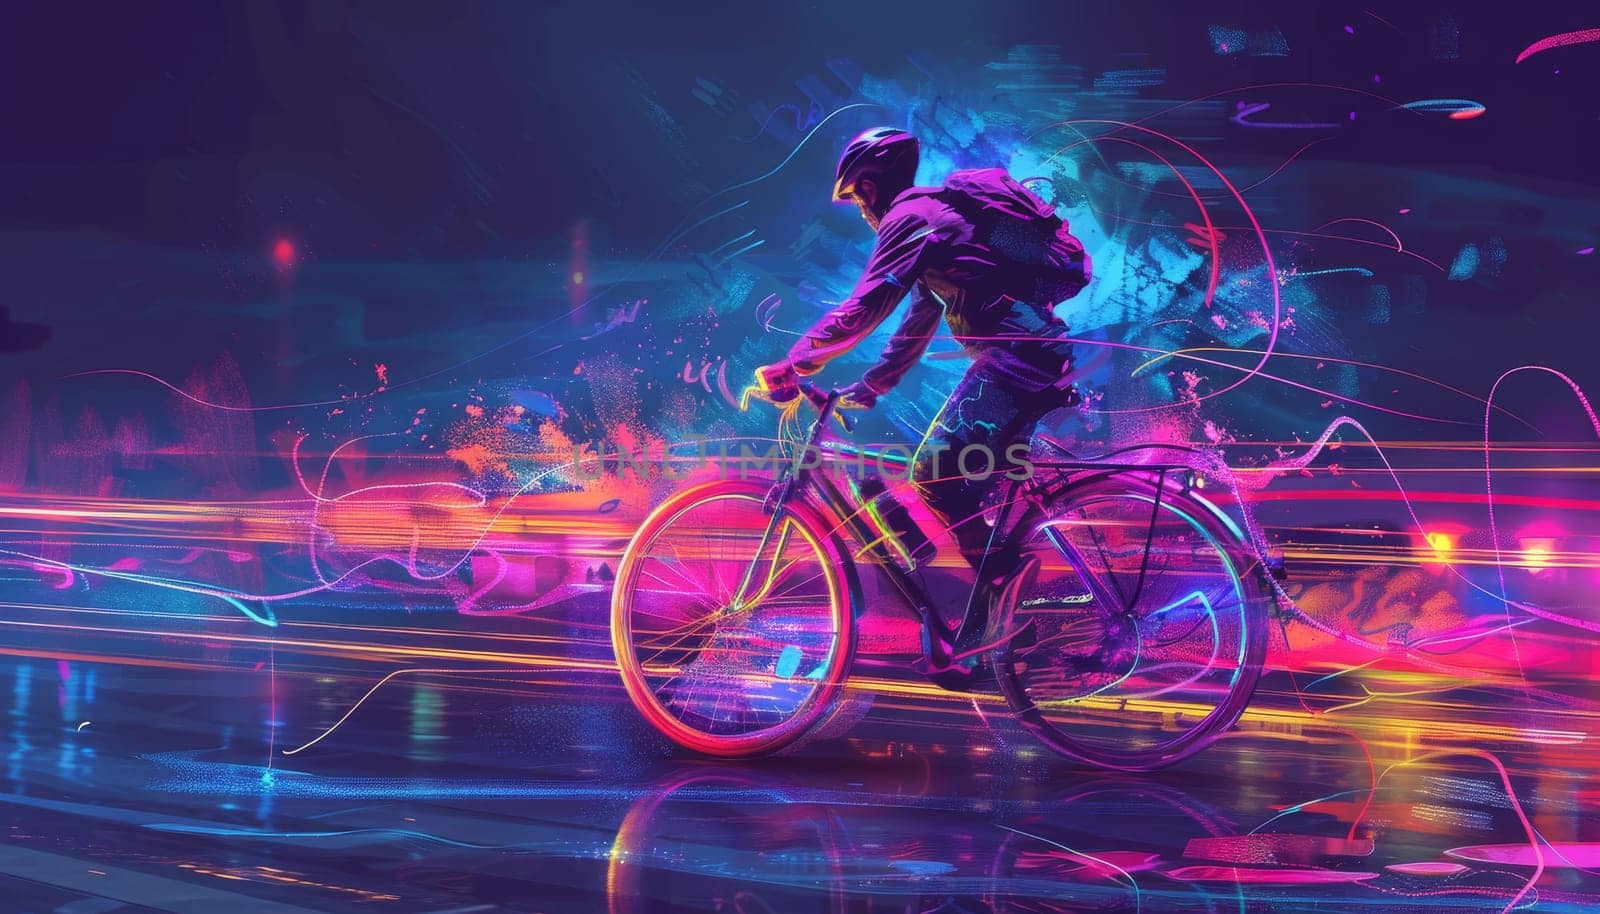 A man is riding a bicycle in a colorful, neon-lit city by AI generated image.